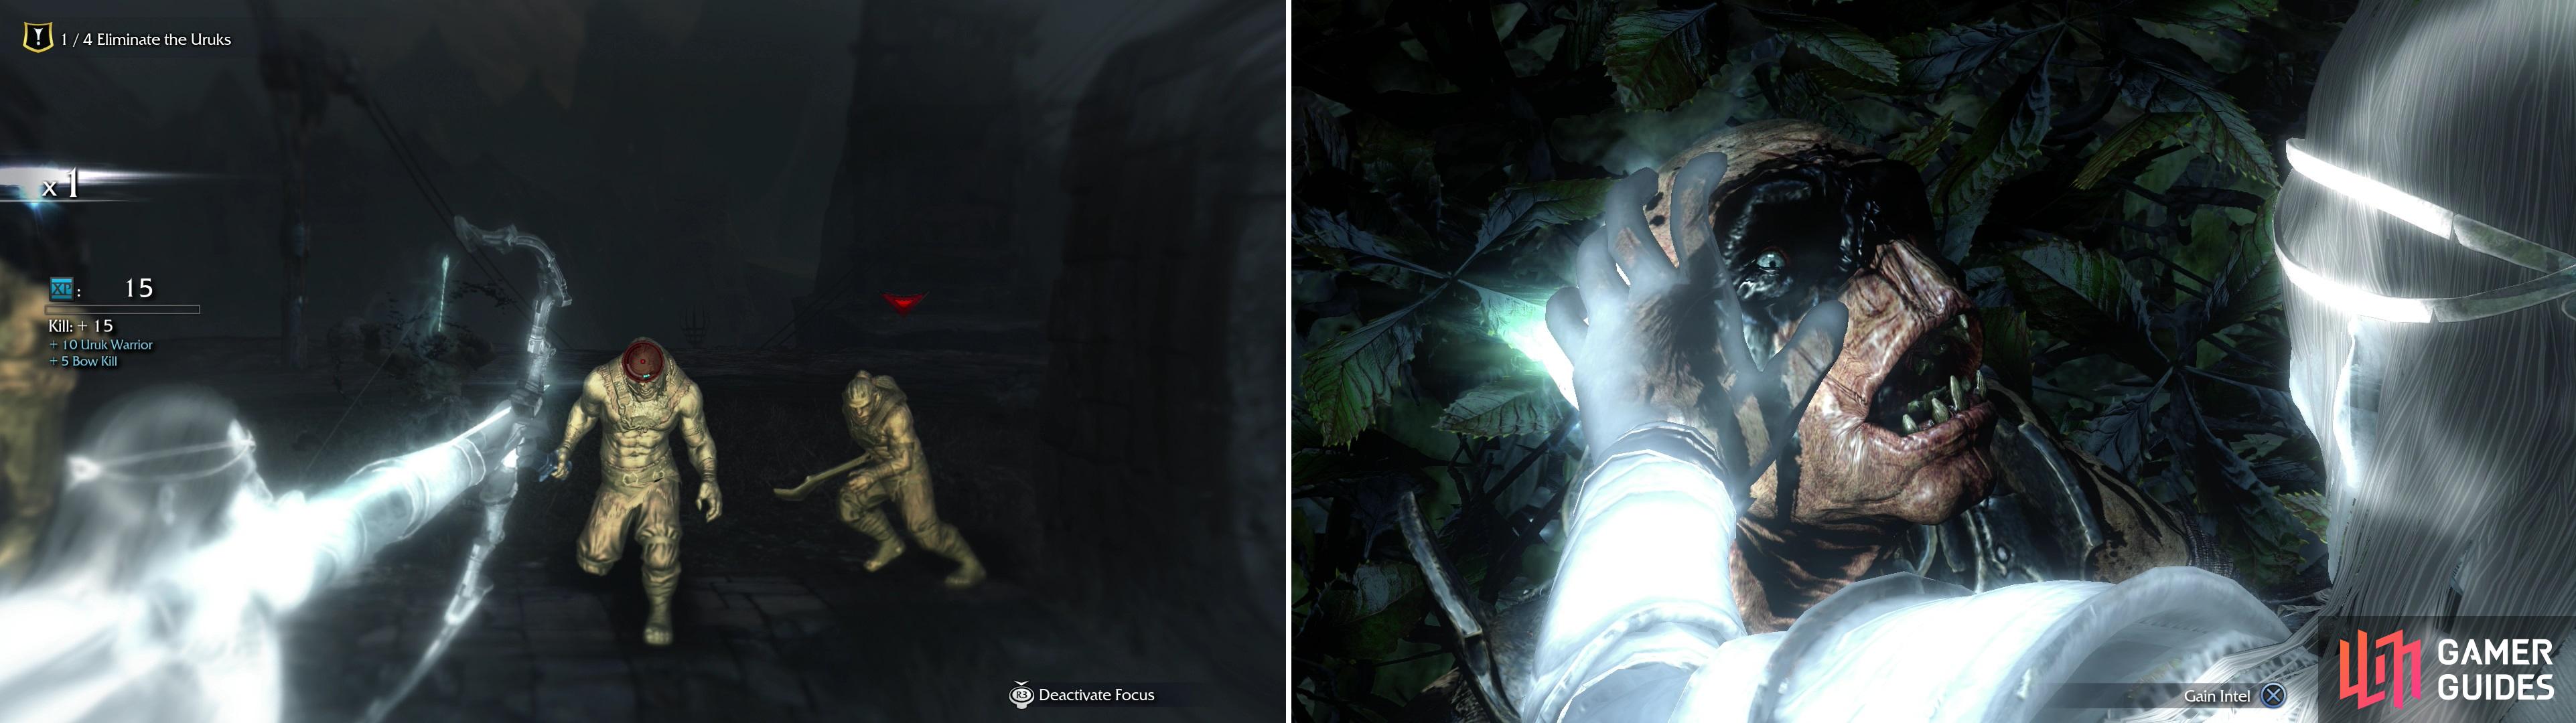 Enter Ranged Mode (L2) and charge your shots (L1). Most normal Uruks can be killed with a single headshot (left). Grab Uruks to Interrogate them, which can earn you vital information about their masters (right).